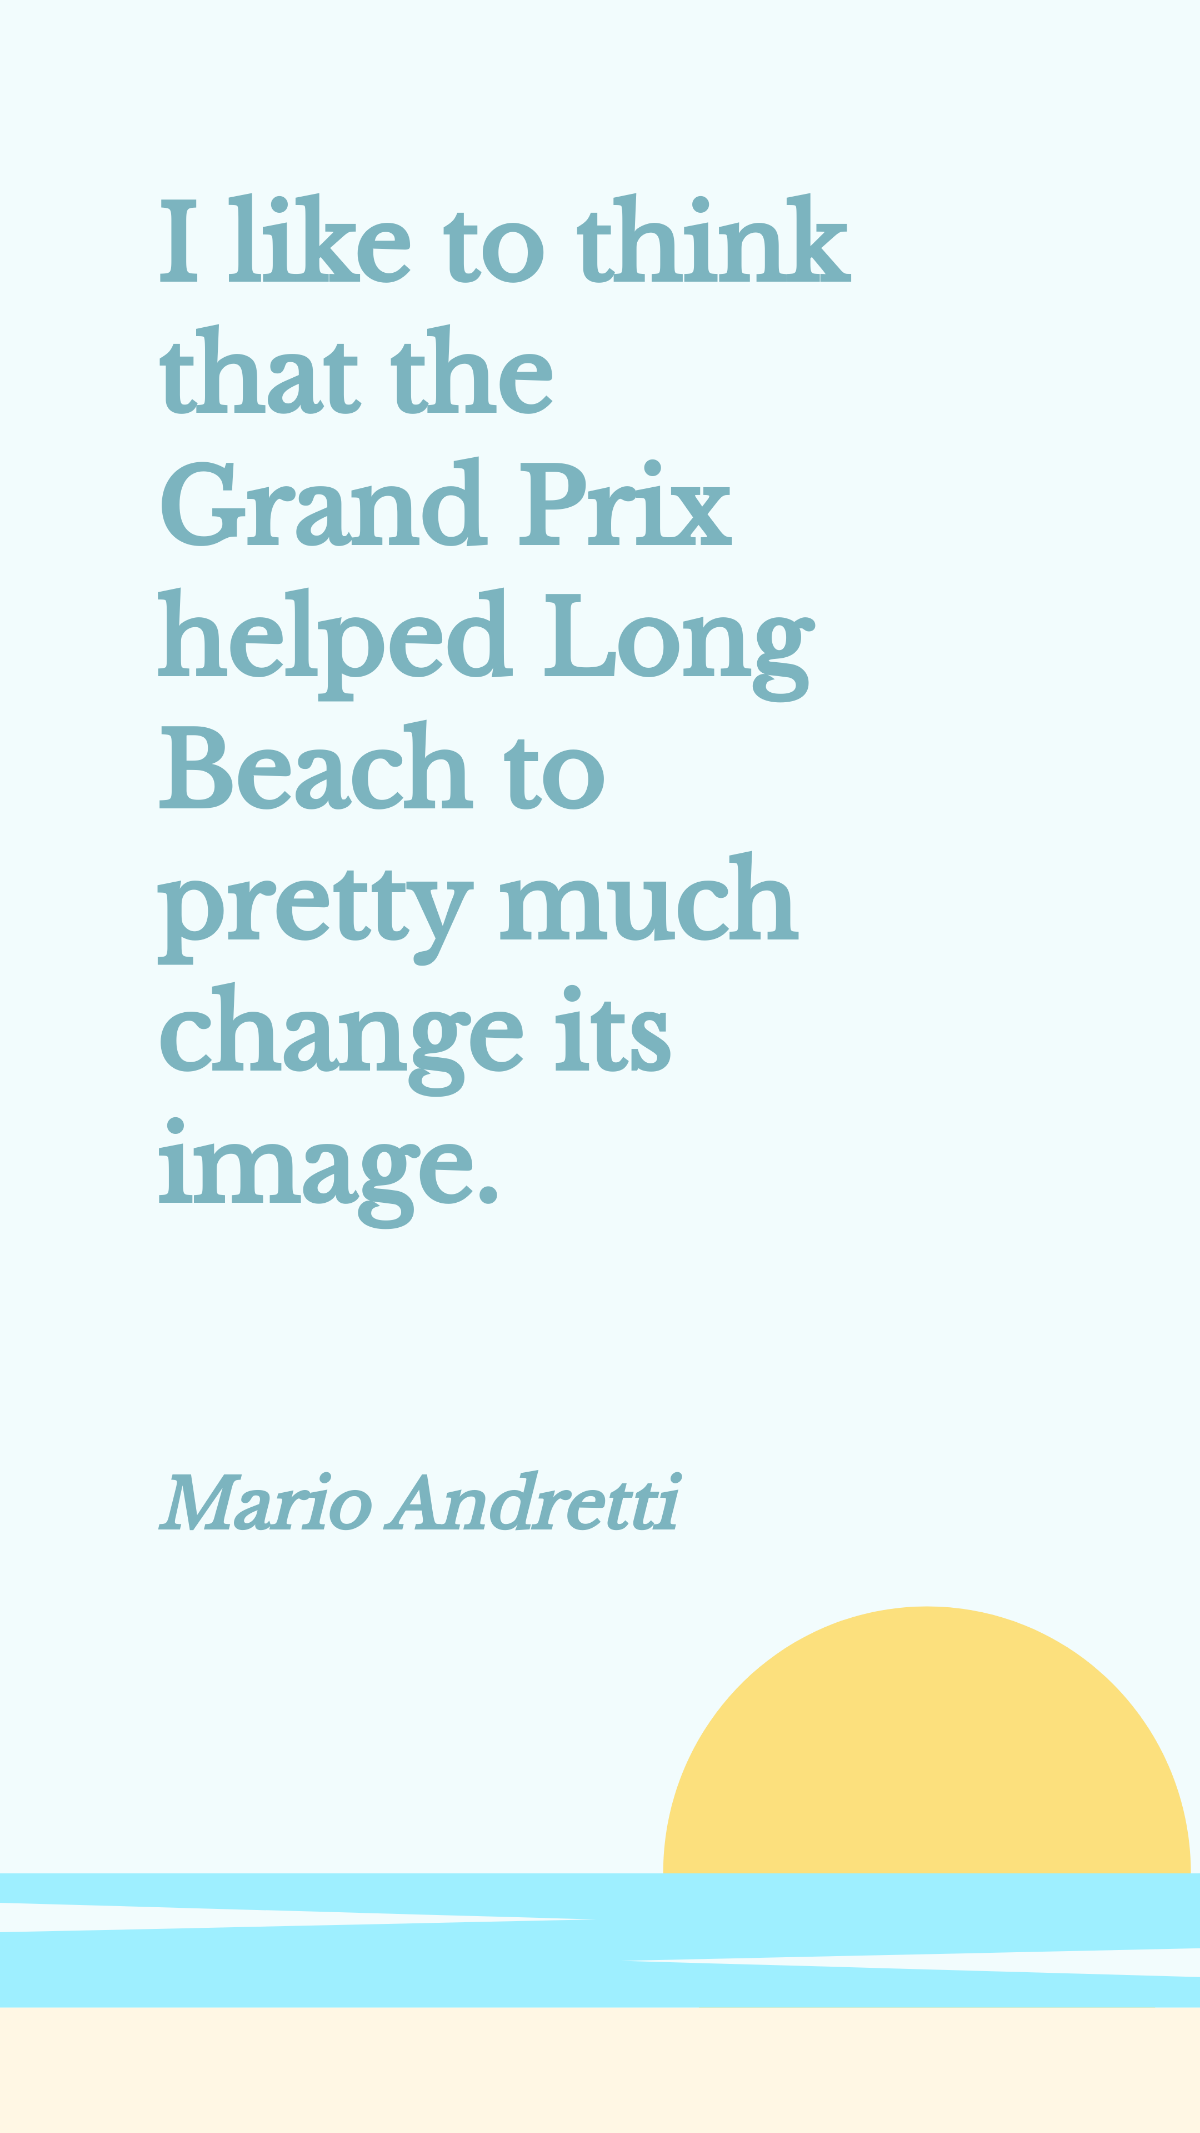 Free Mario Andretti - I like to think that the Grand Prix helped Long Beach to pretty much change its image. Template